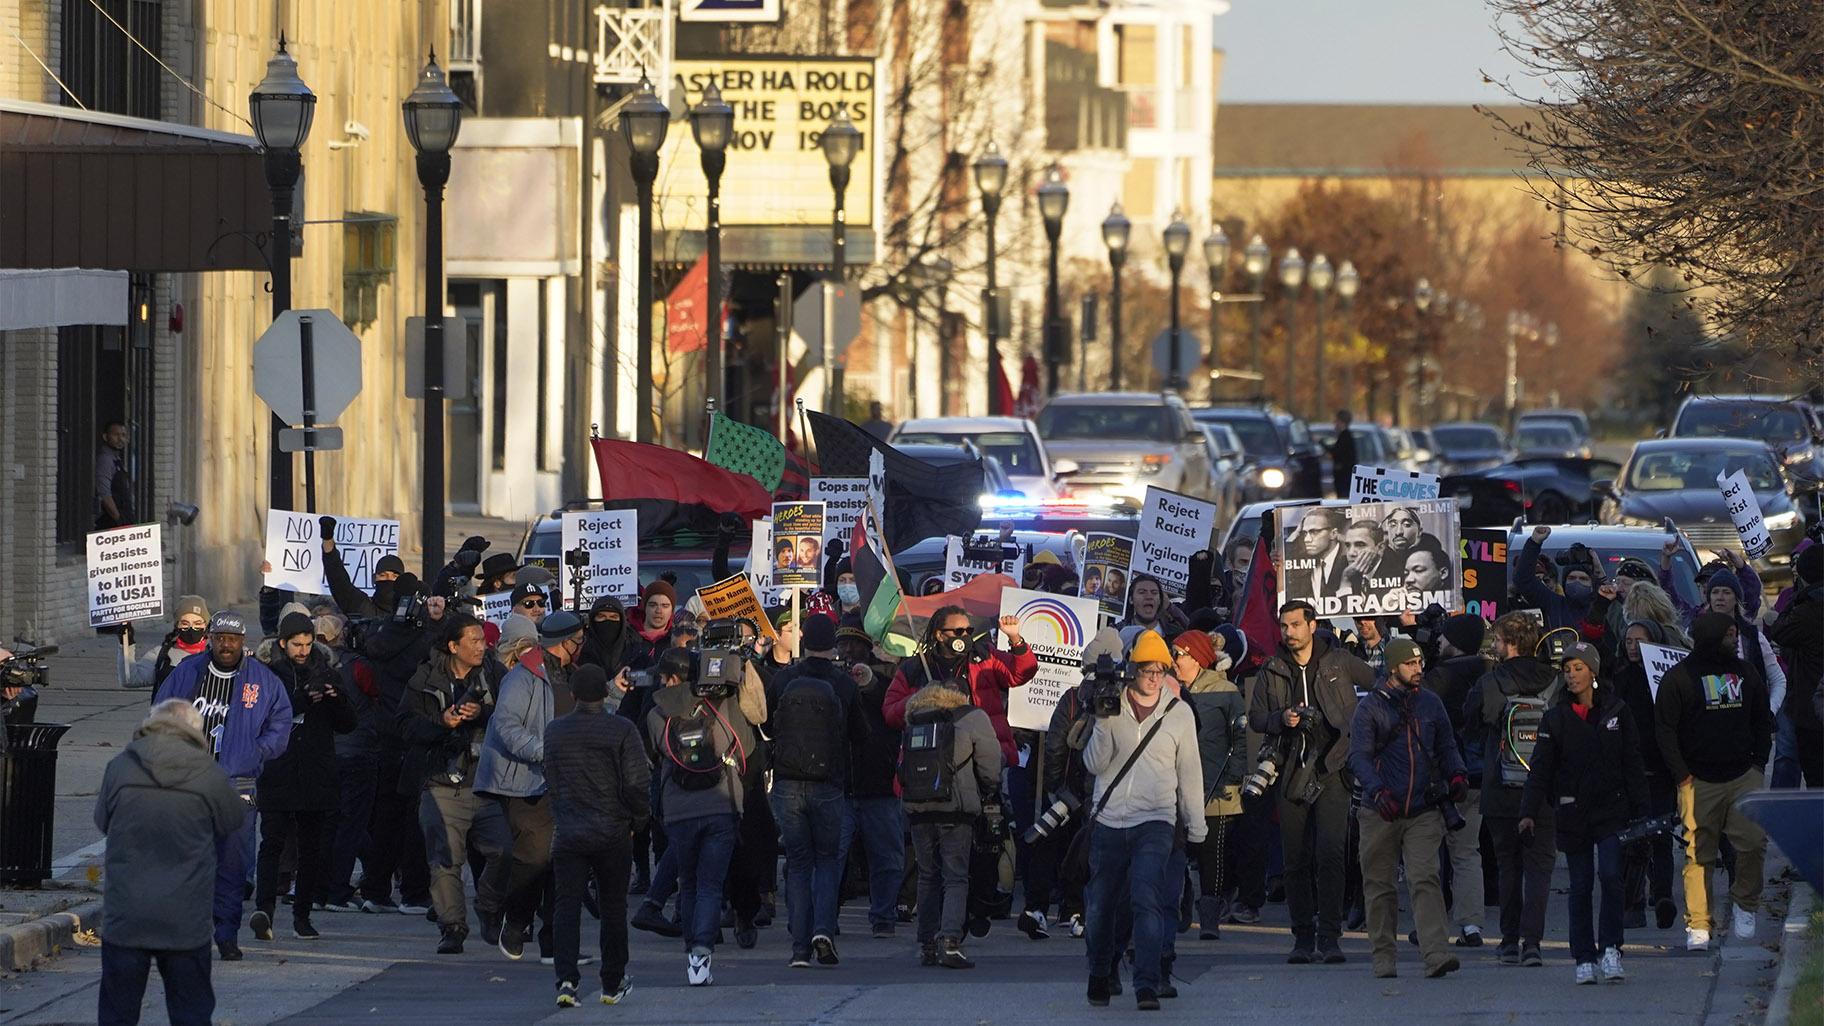 Protesters march, Sunday, Nov. 21, 2021, in Kenosha, Wis. Kyle Rittenhouse was acquitted of all charges after pleading self-defense in the deadly Kenosha shootings that became a flashpoint in the nation's debate over guns, vigilantism and racial injustice. (AP Photo / Paul Sancya)